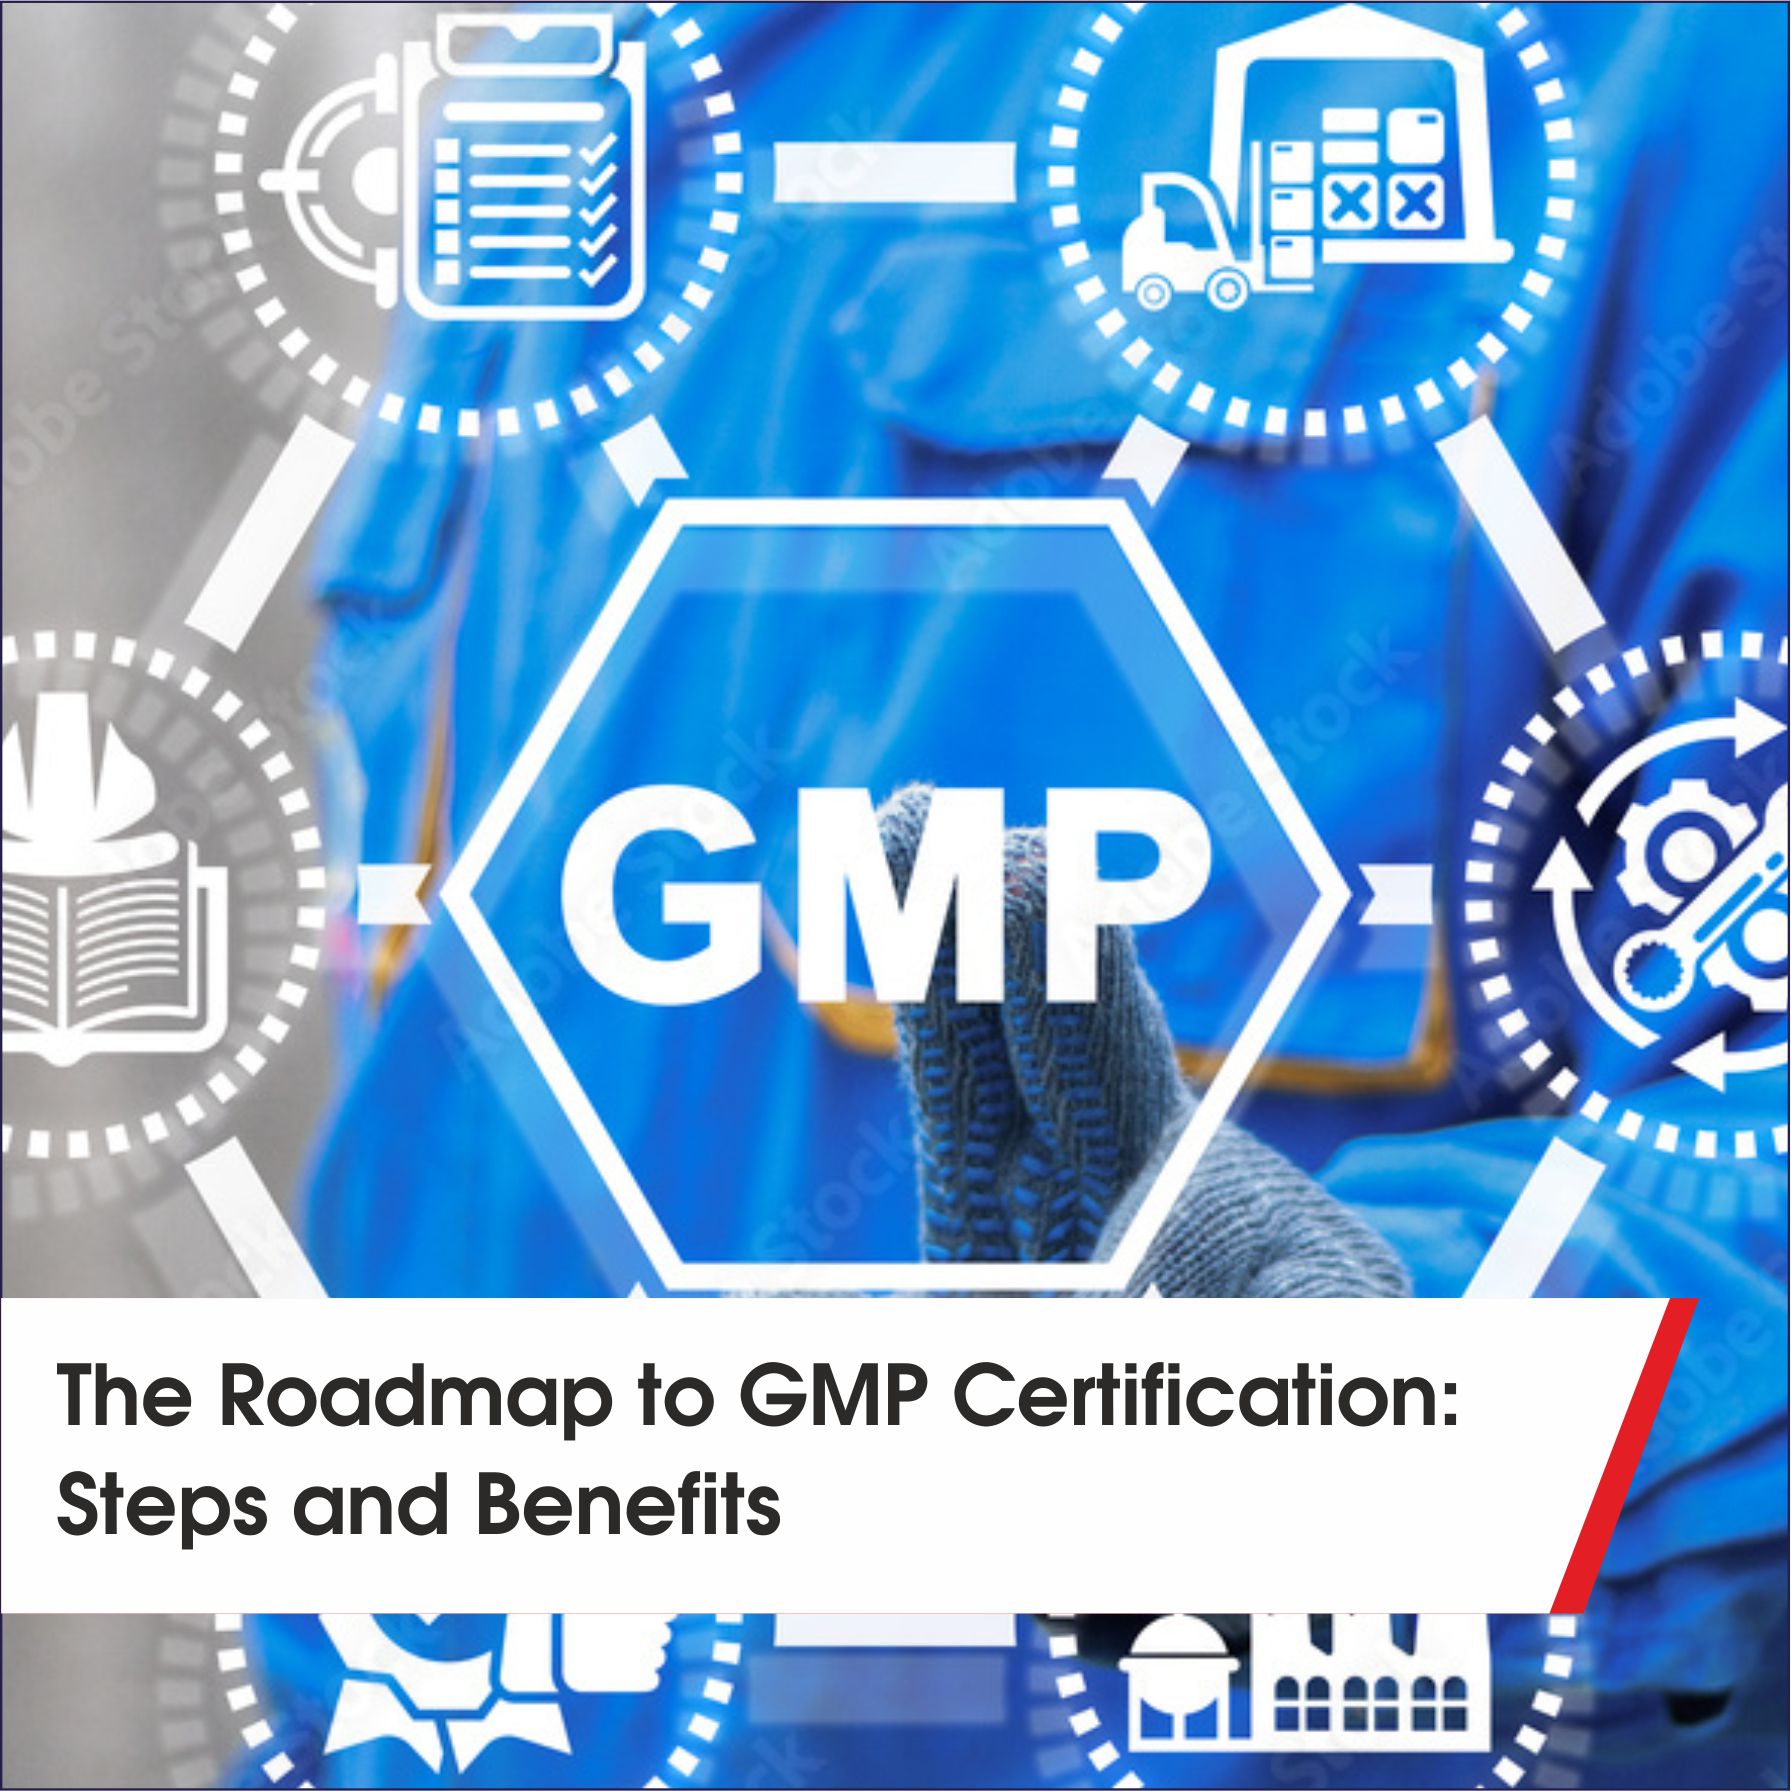 The Roadmap to GMP Certification: Steps and Benefits